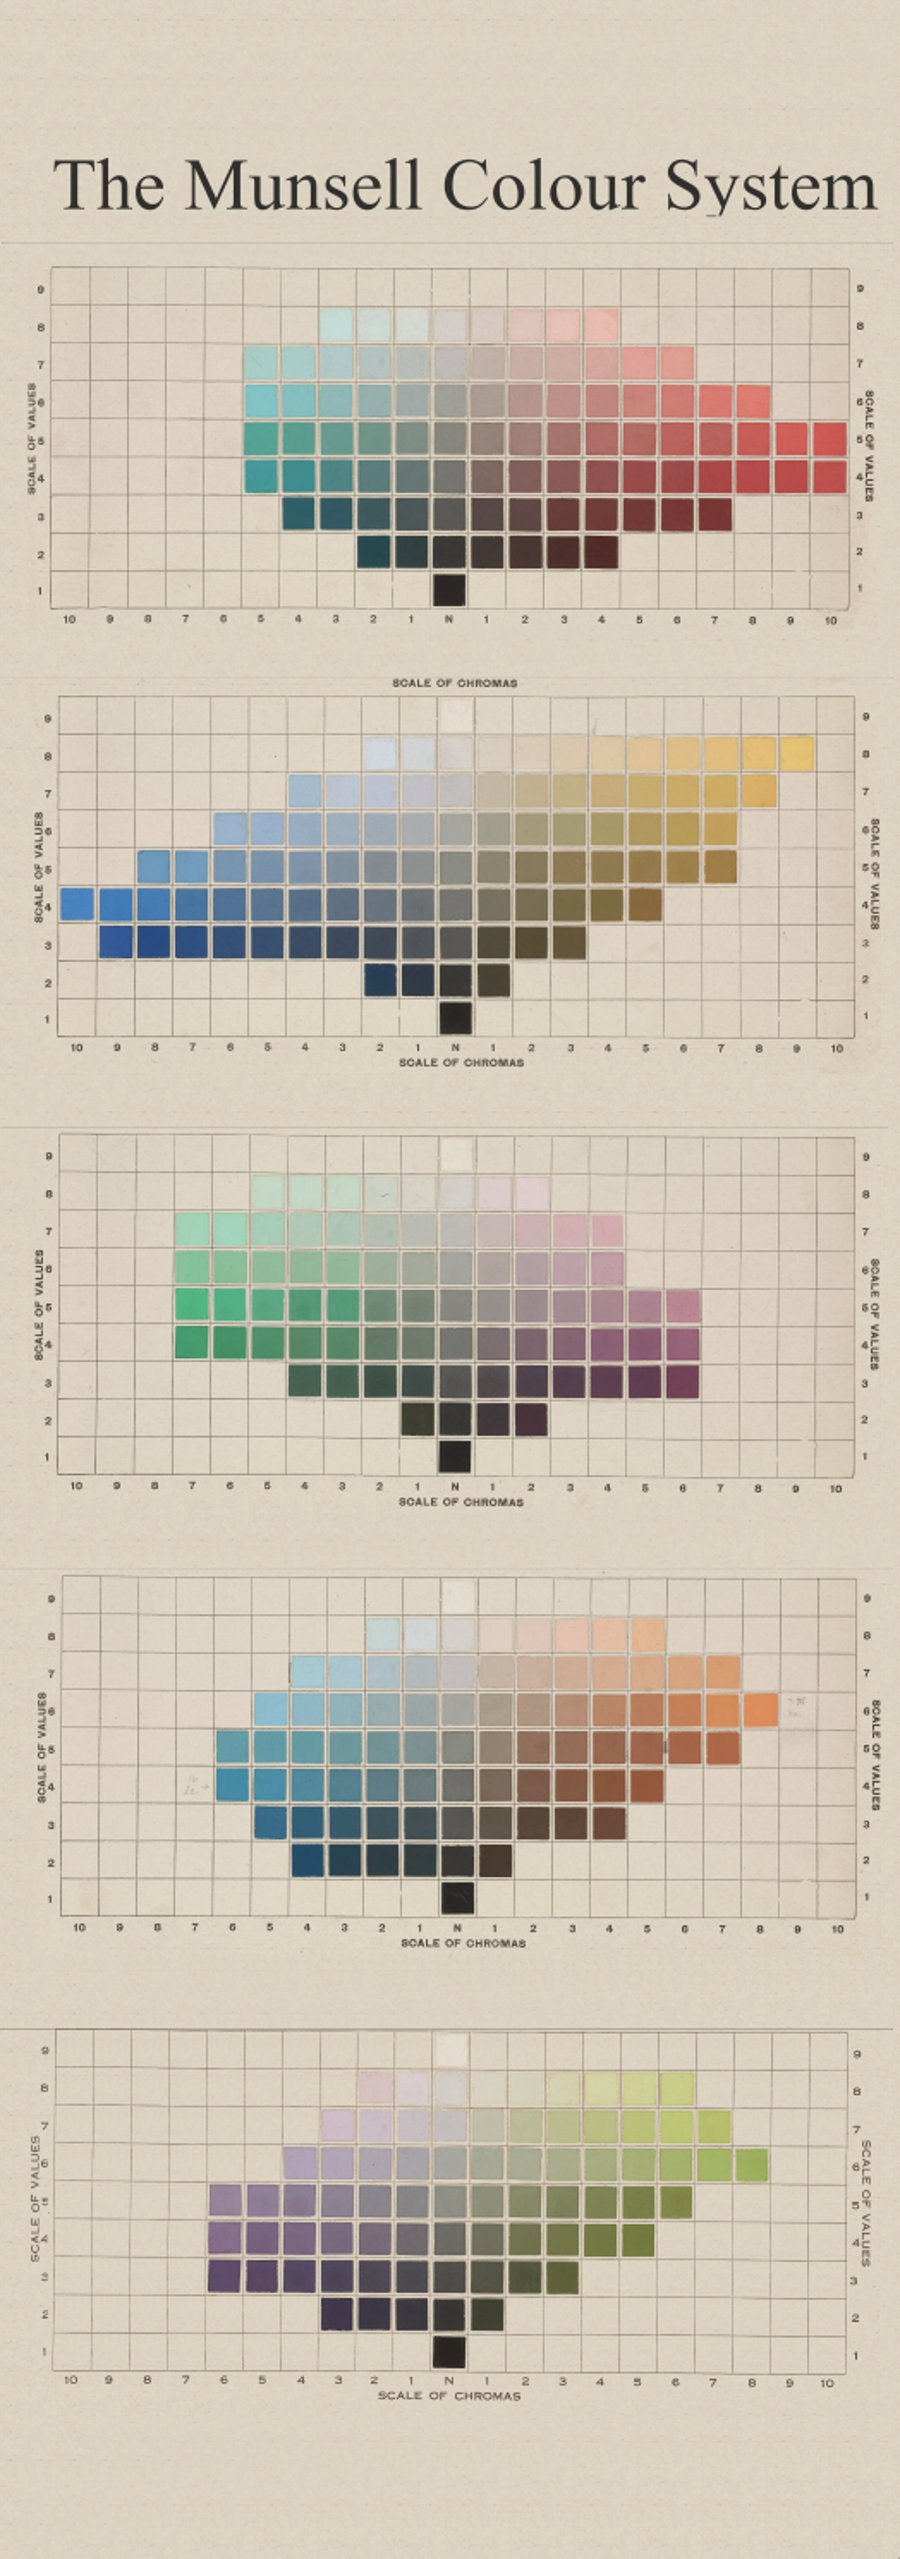 Munsell Colour System Colour Theory Large Poster